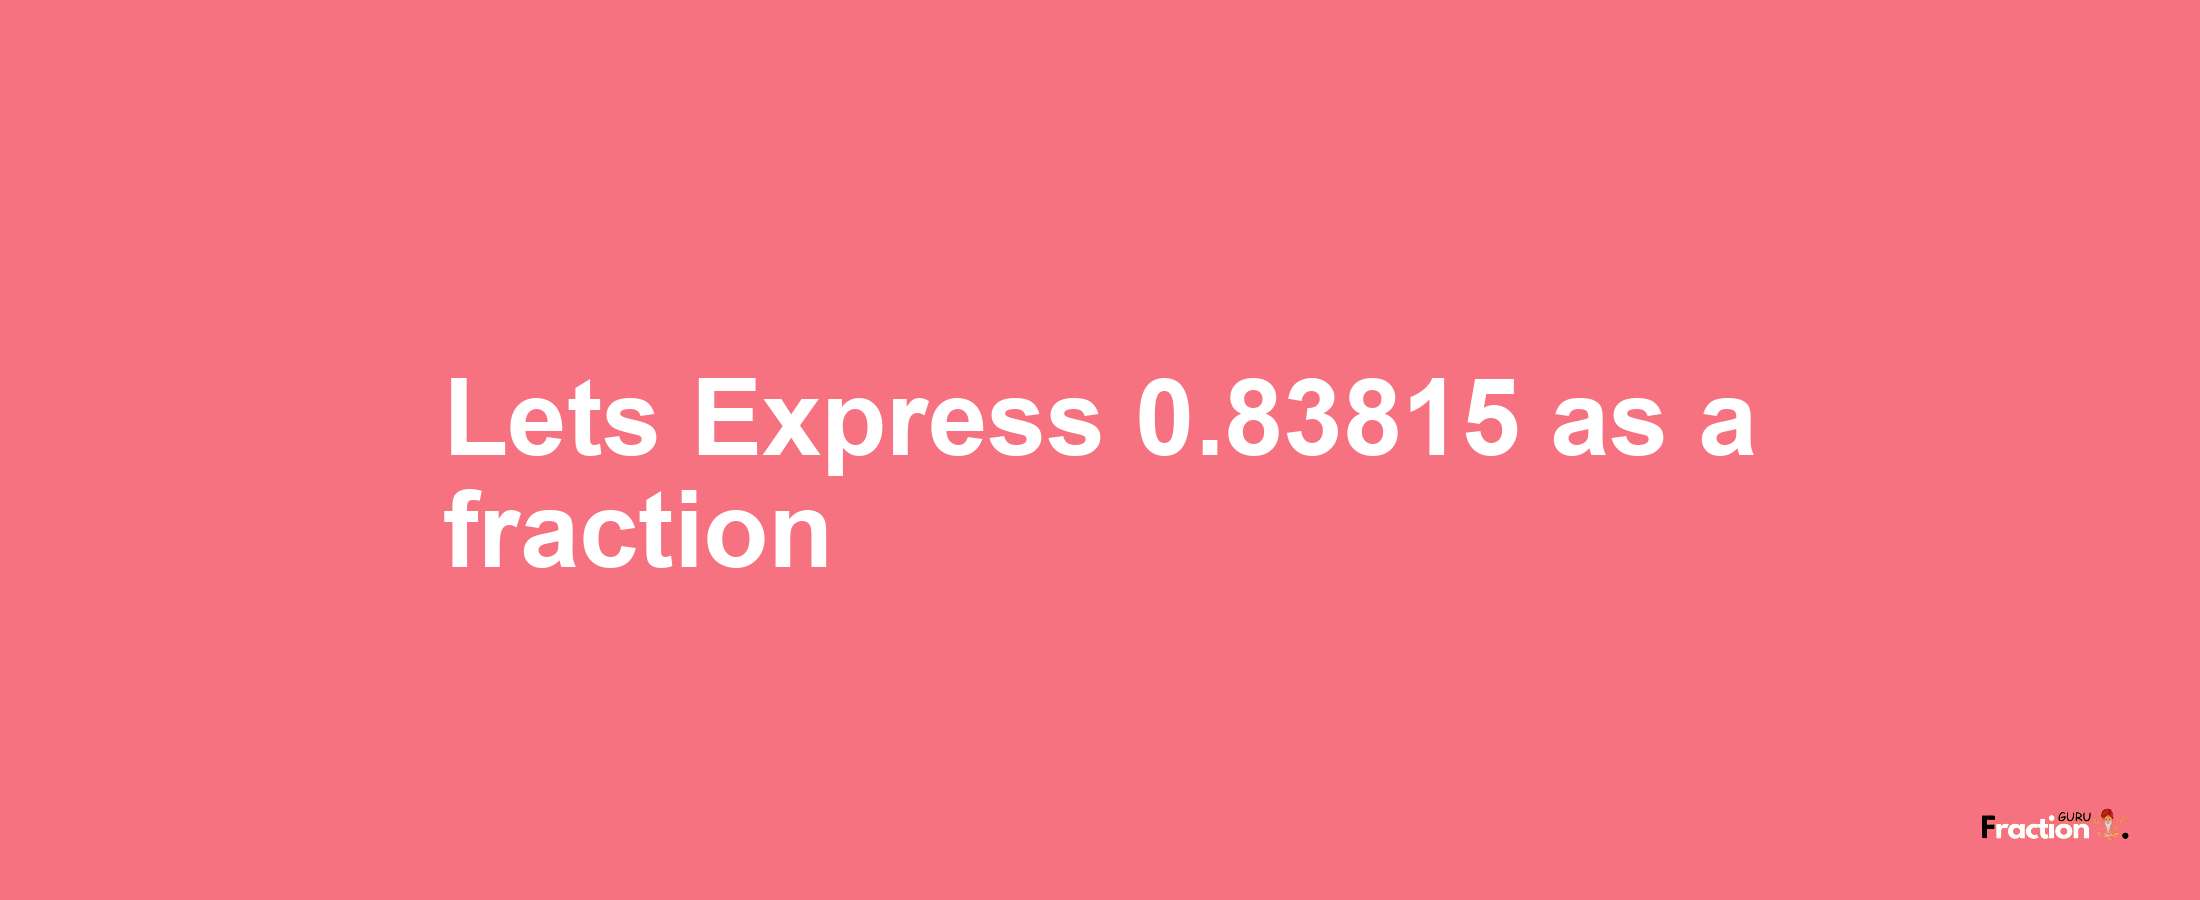 Lets Express 0.83815 as afraction